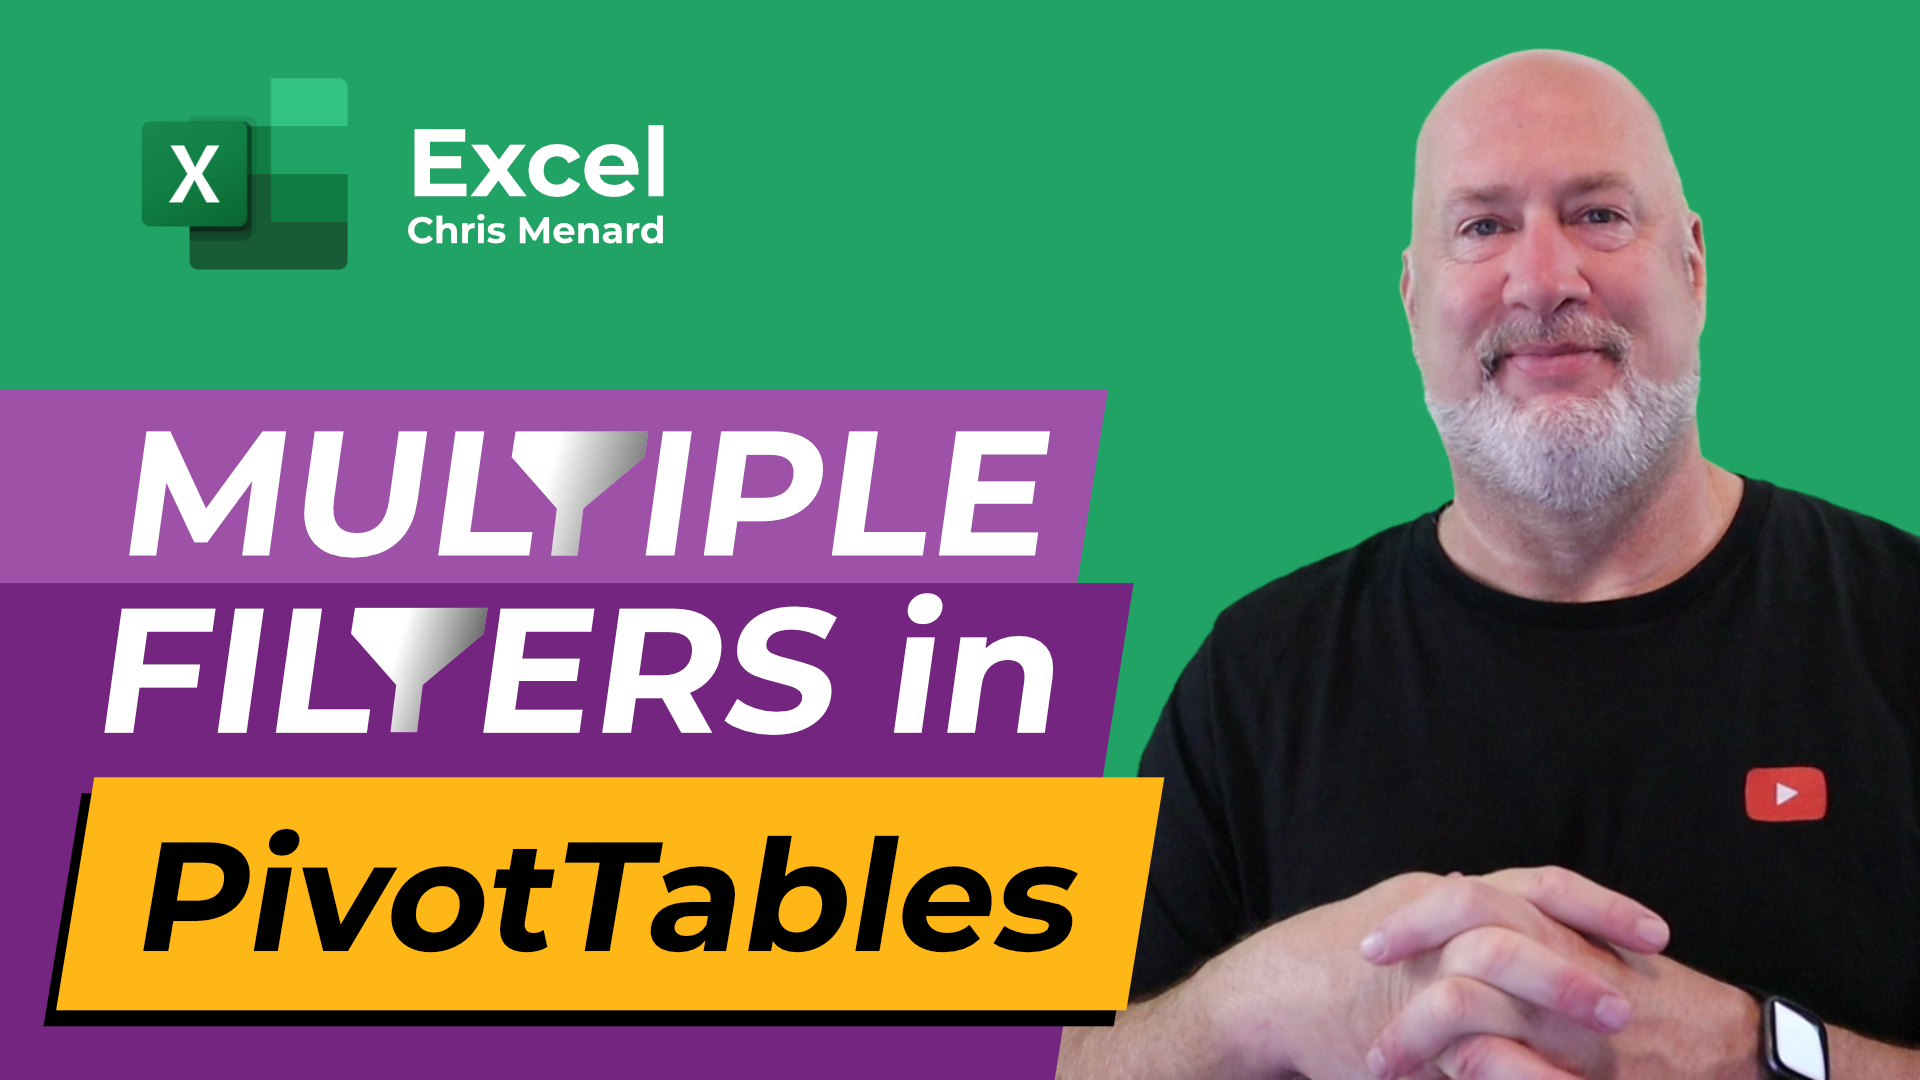 Excel - Turn on Multiple Filters in a PivotTable